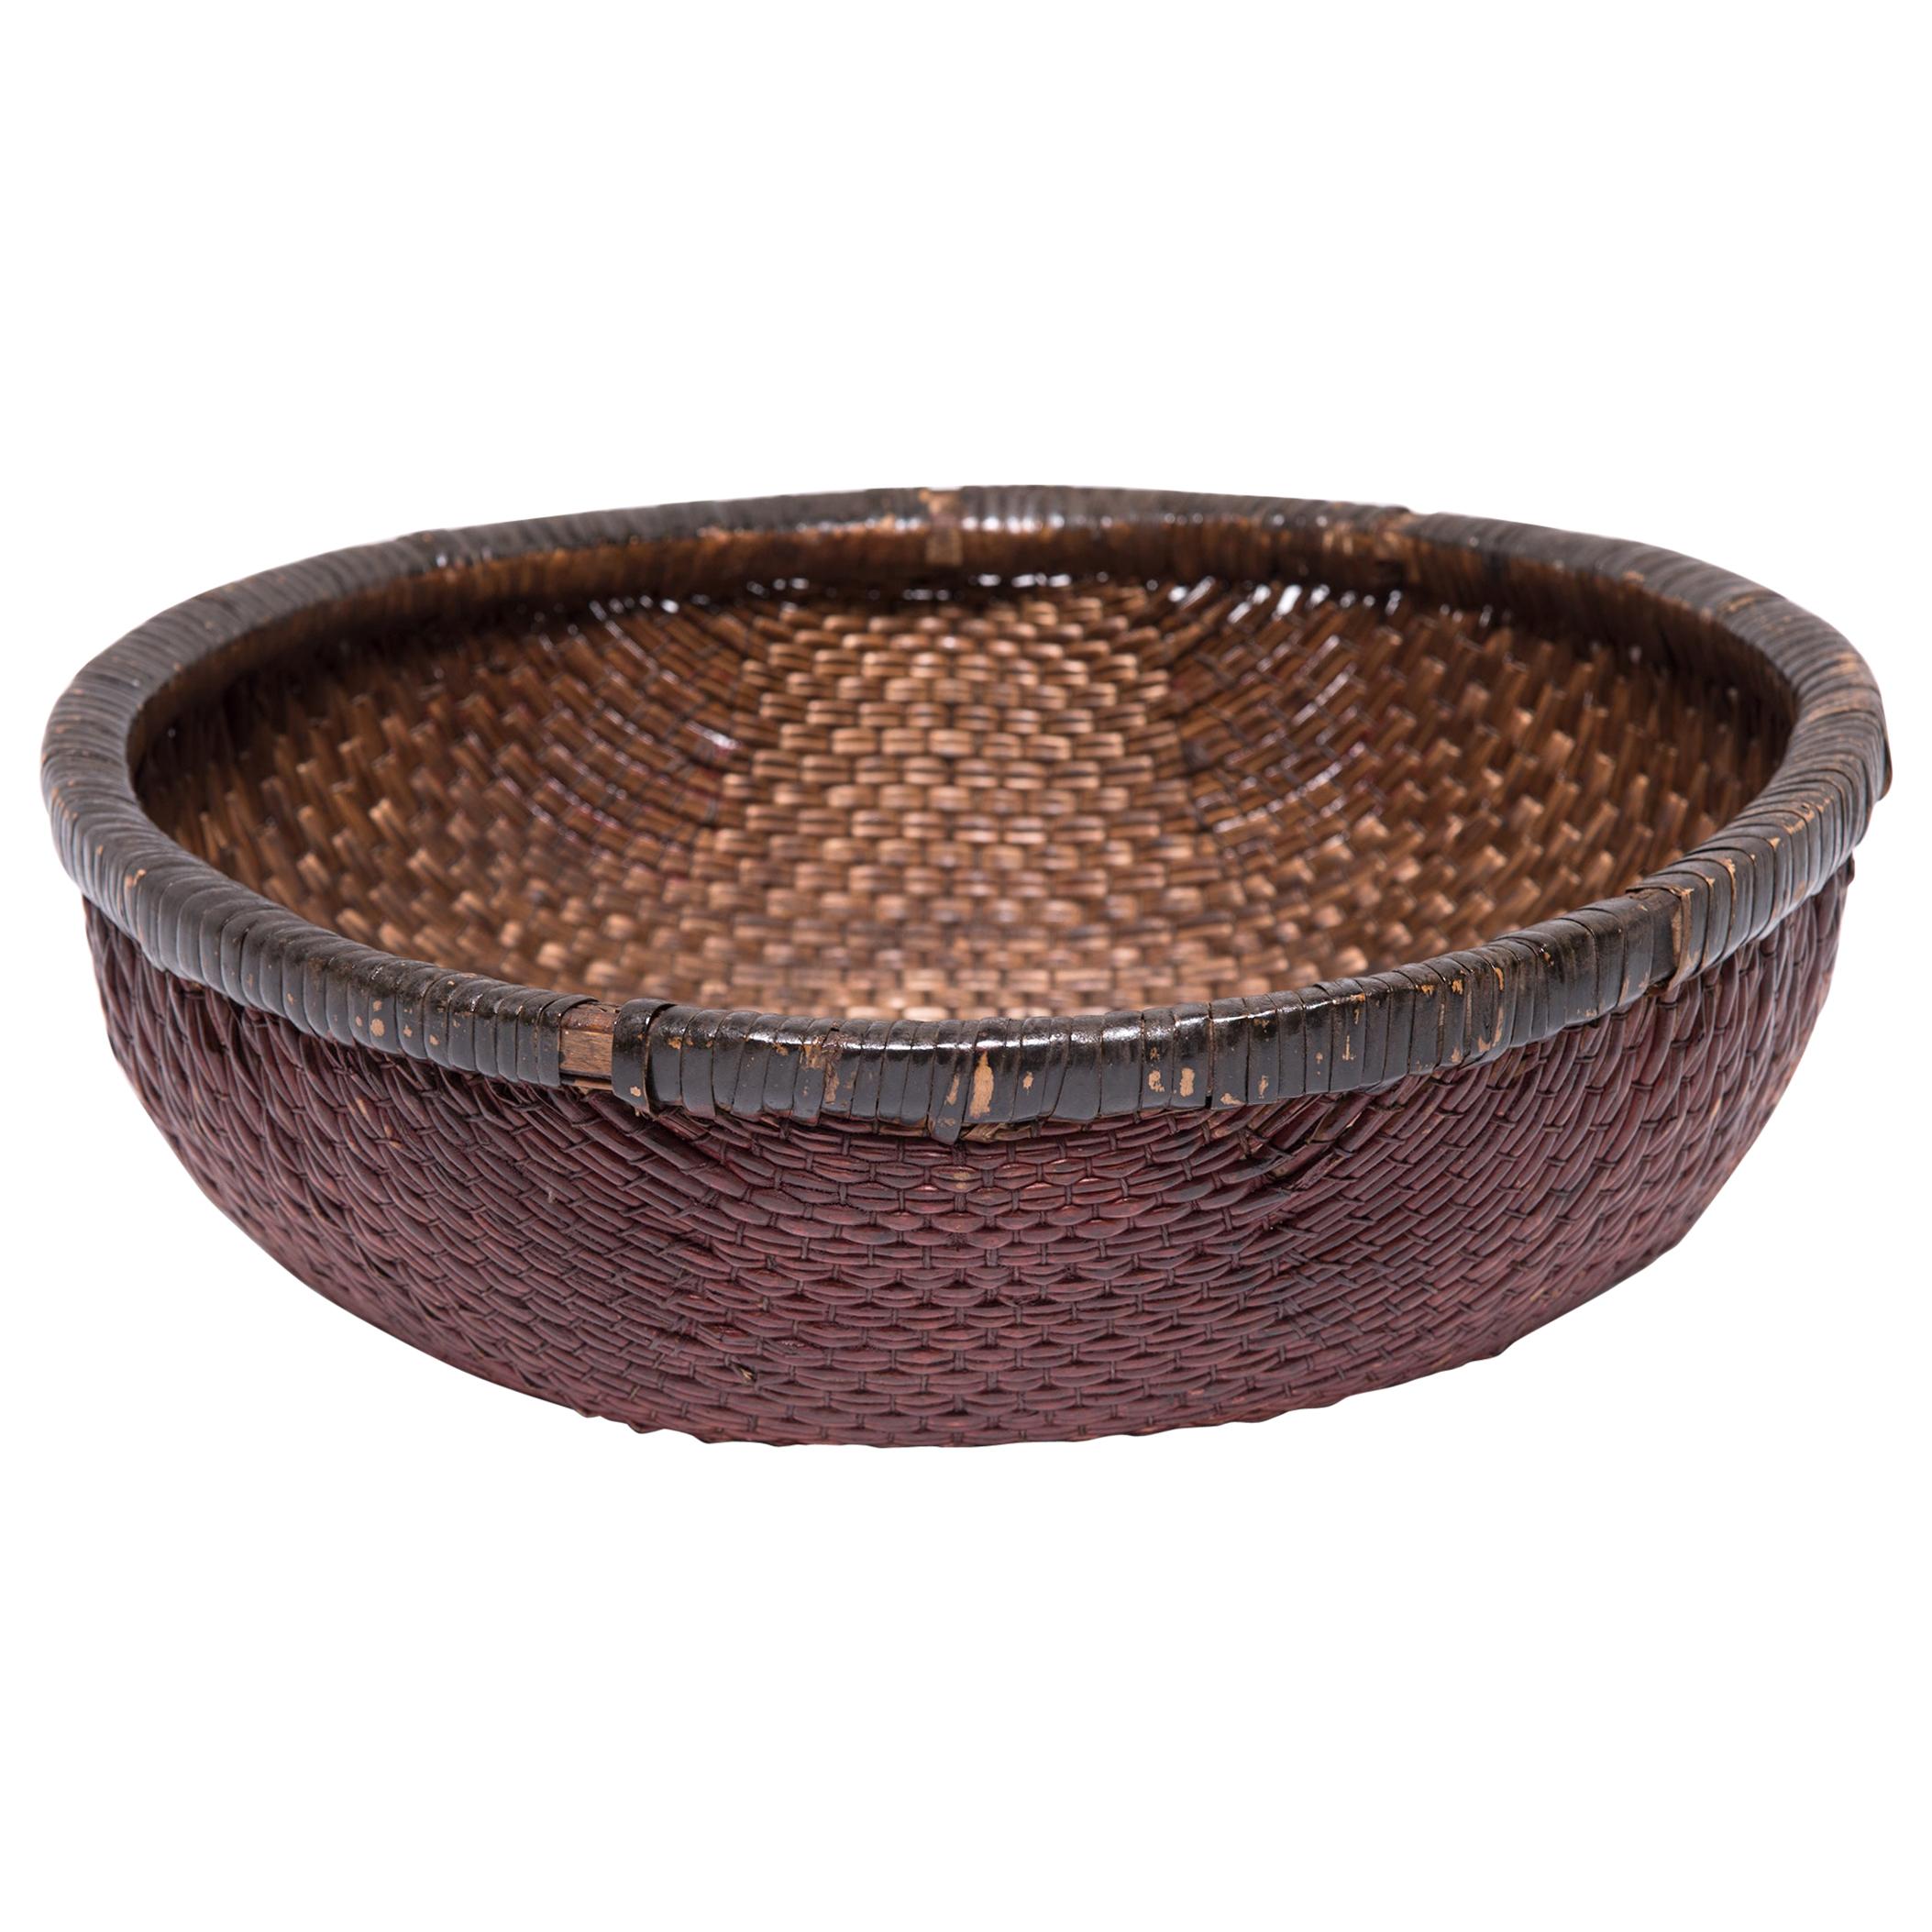 Early 20th Century Chinese Woven Field Basket